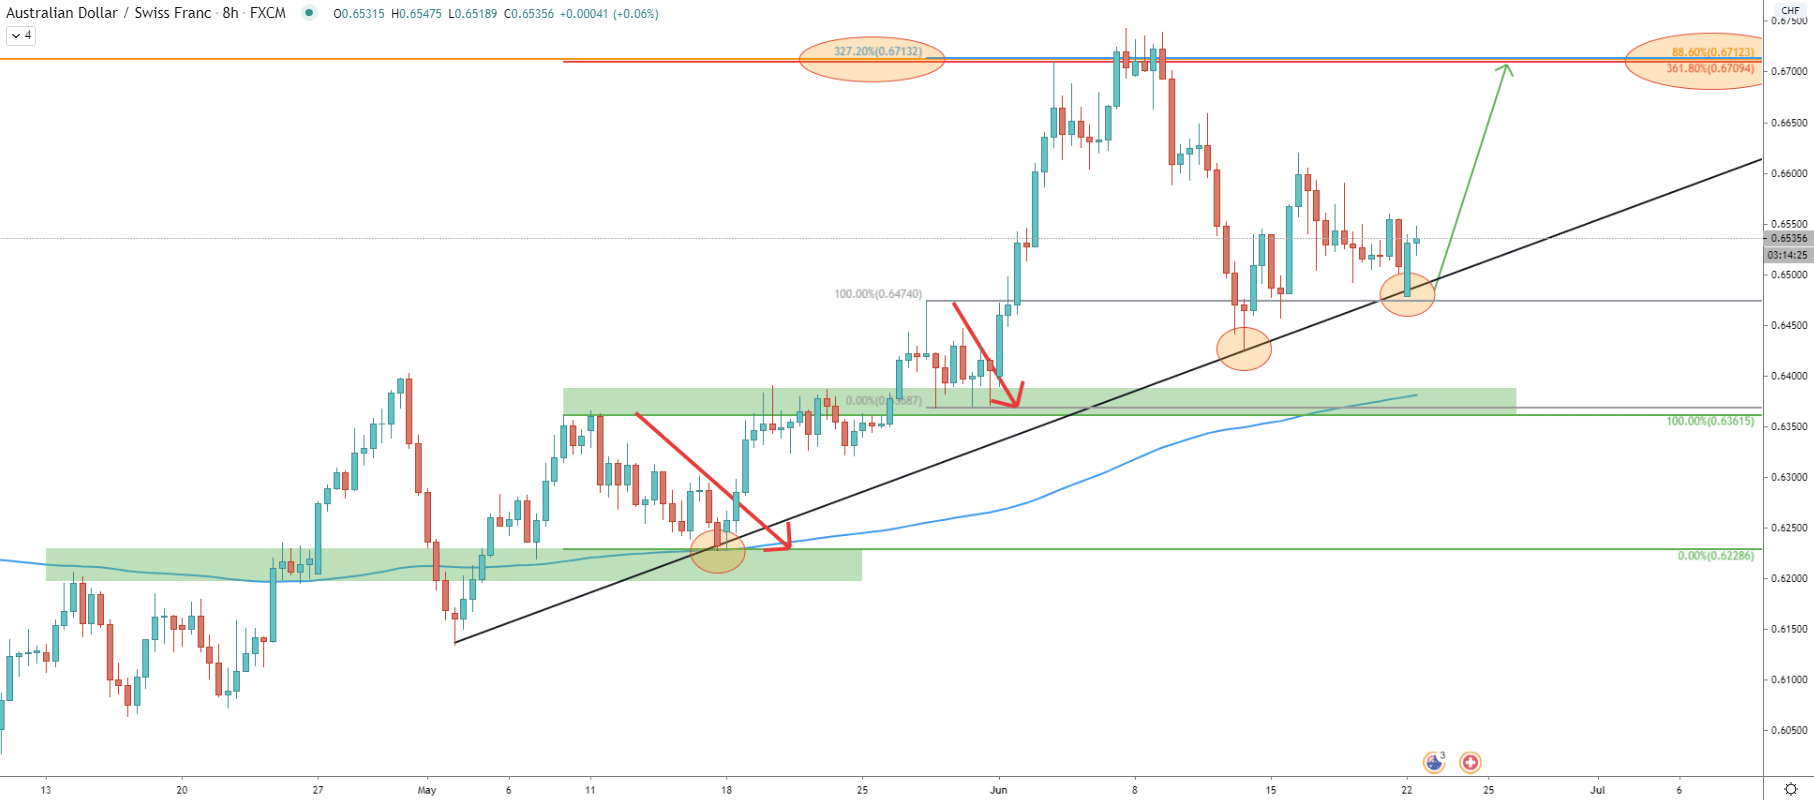 AUD/CHF 8-Hour Technical Analysis 22 June 2020